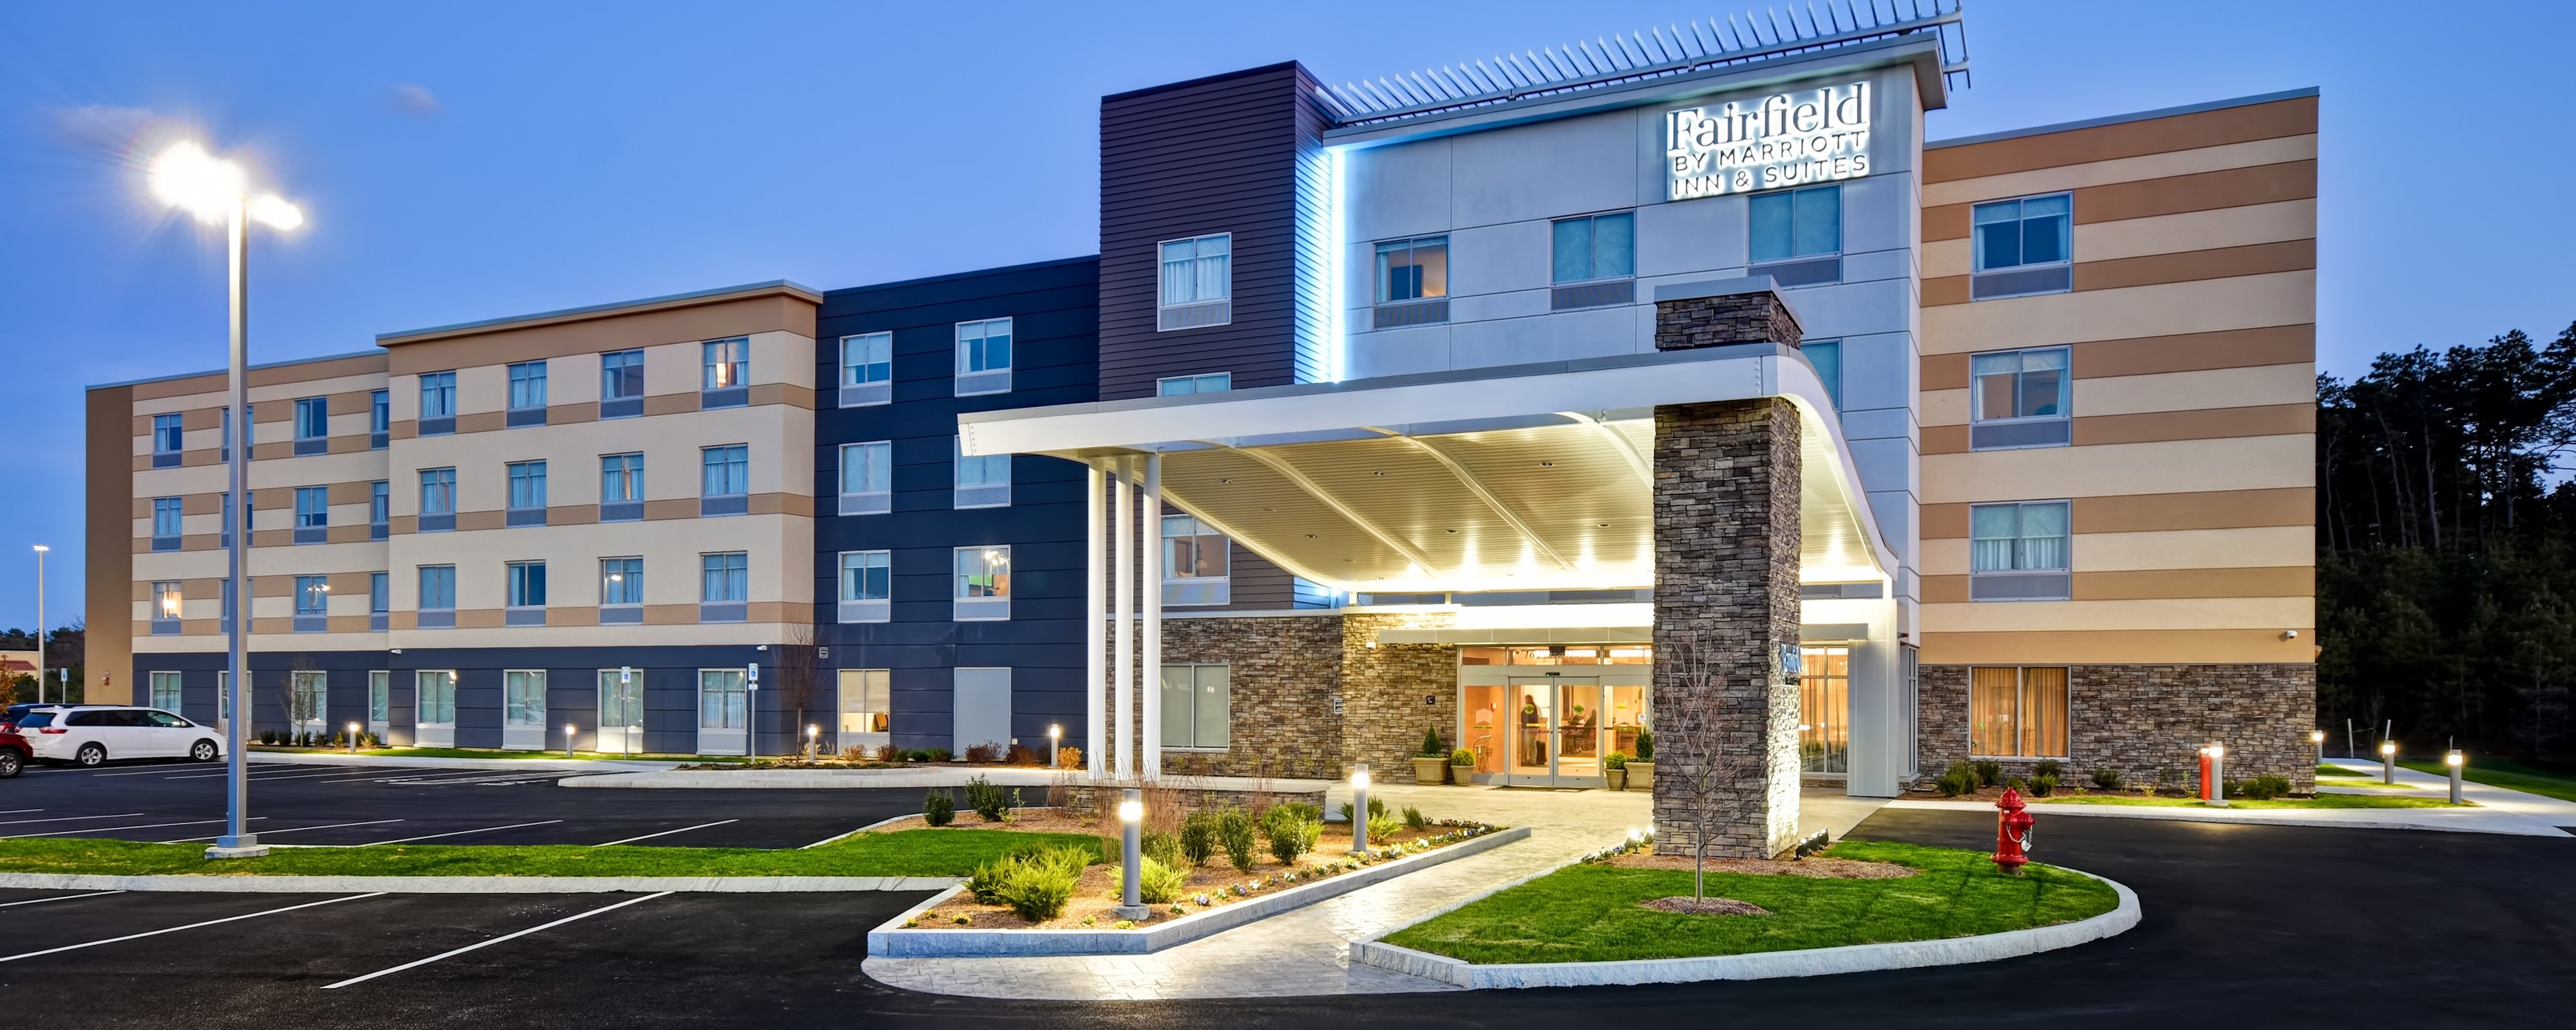 Business Hotel In Plymouth Fairfield Inn Suites Plymouth